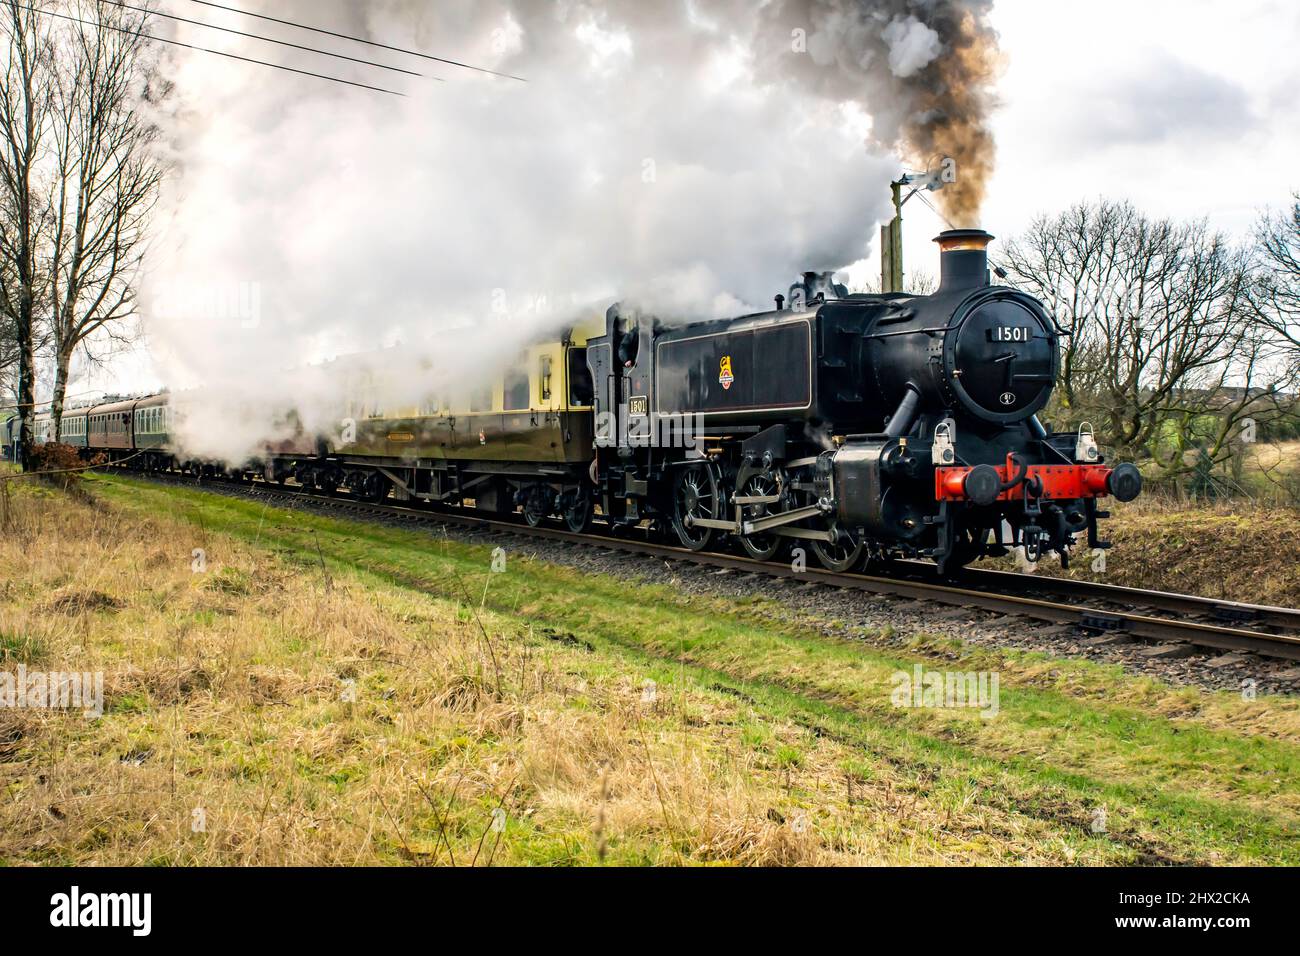 GWR Pannier number 1501 on the East Lancs Railway Stock Photo